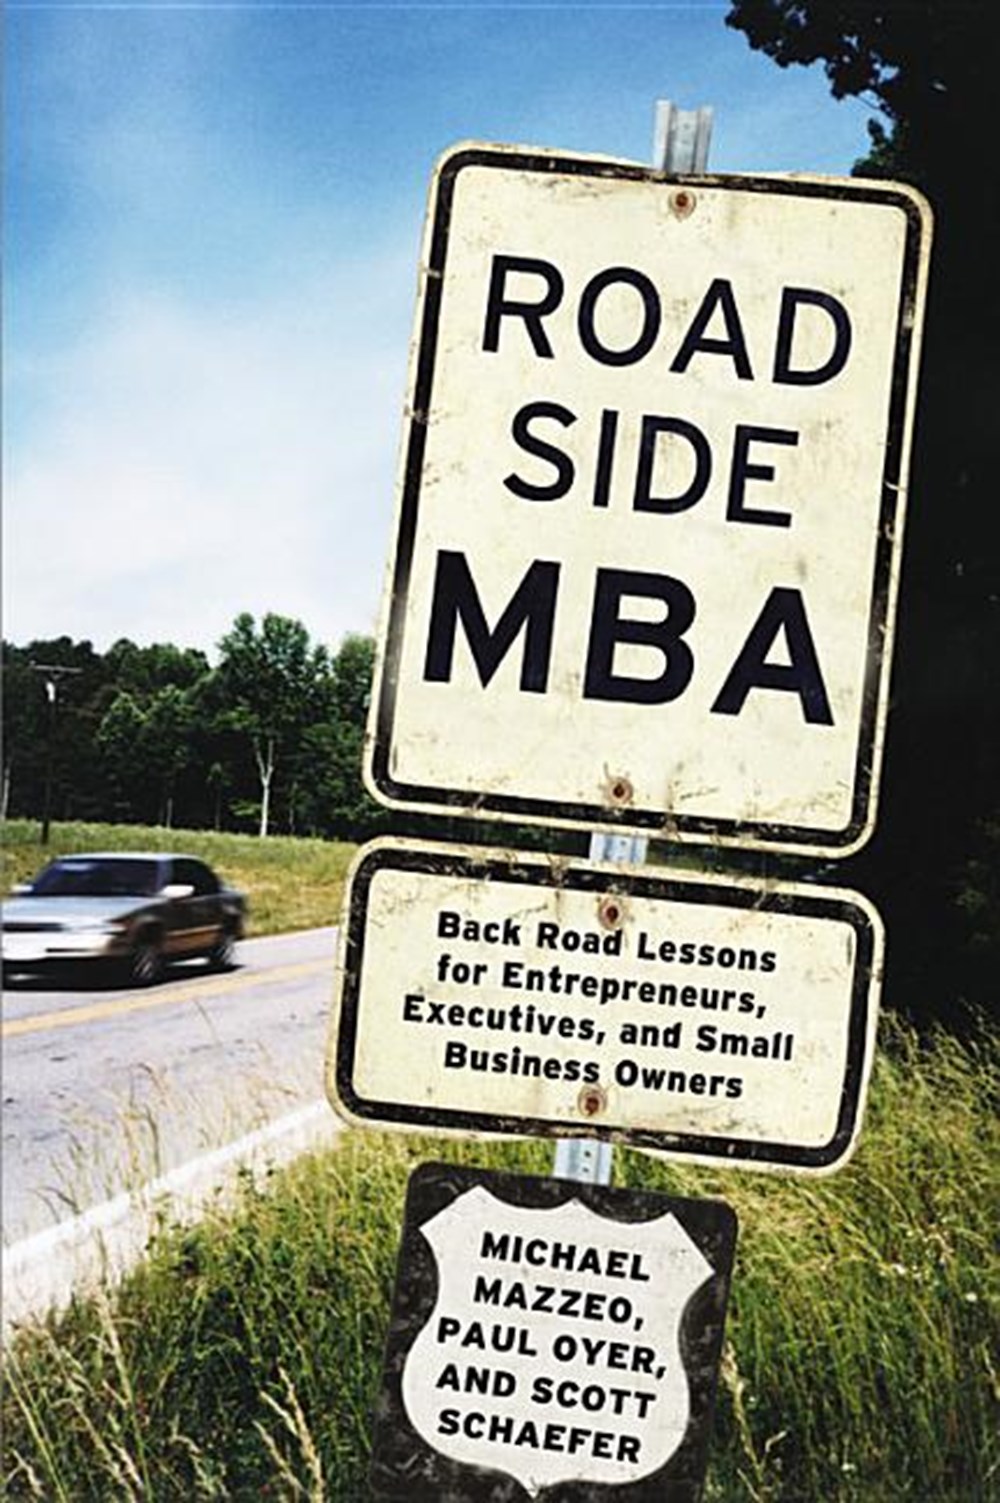 Roadside MBA: Back Road Lessons for Entrepreneurs, Executives, and Small Business Owners